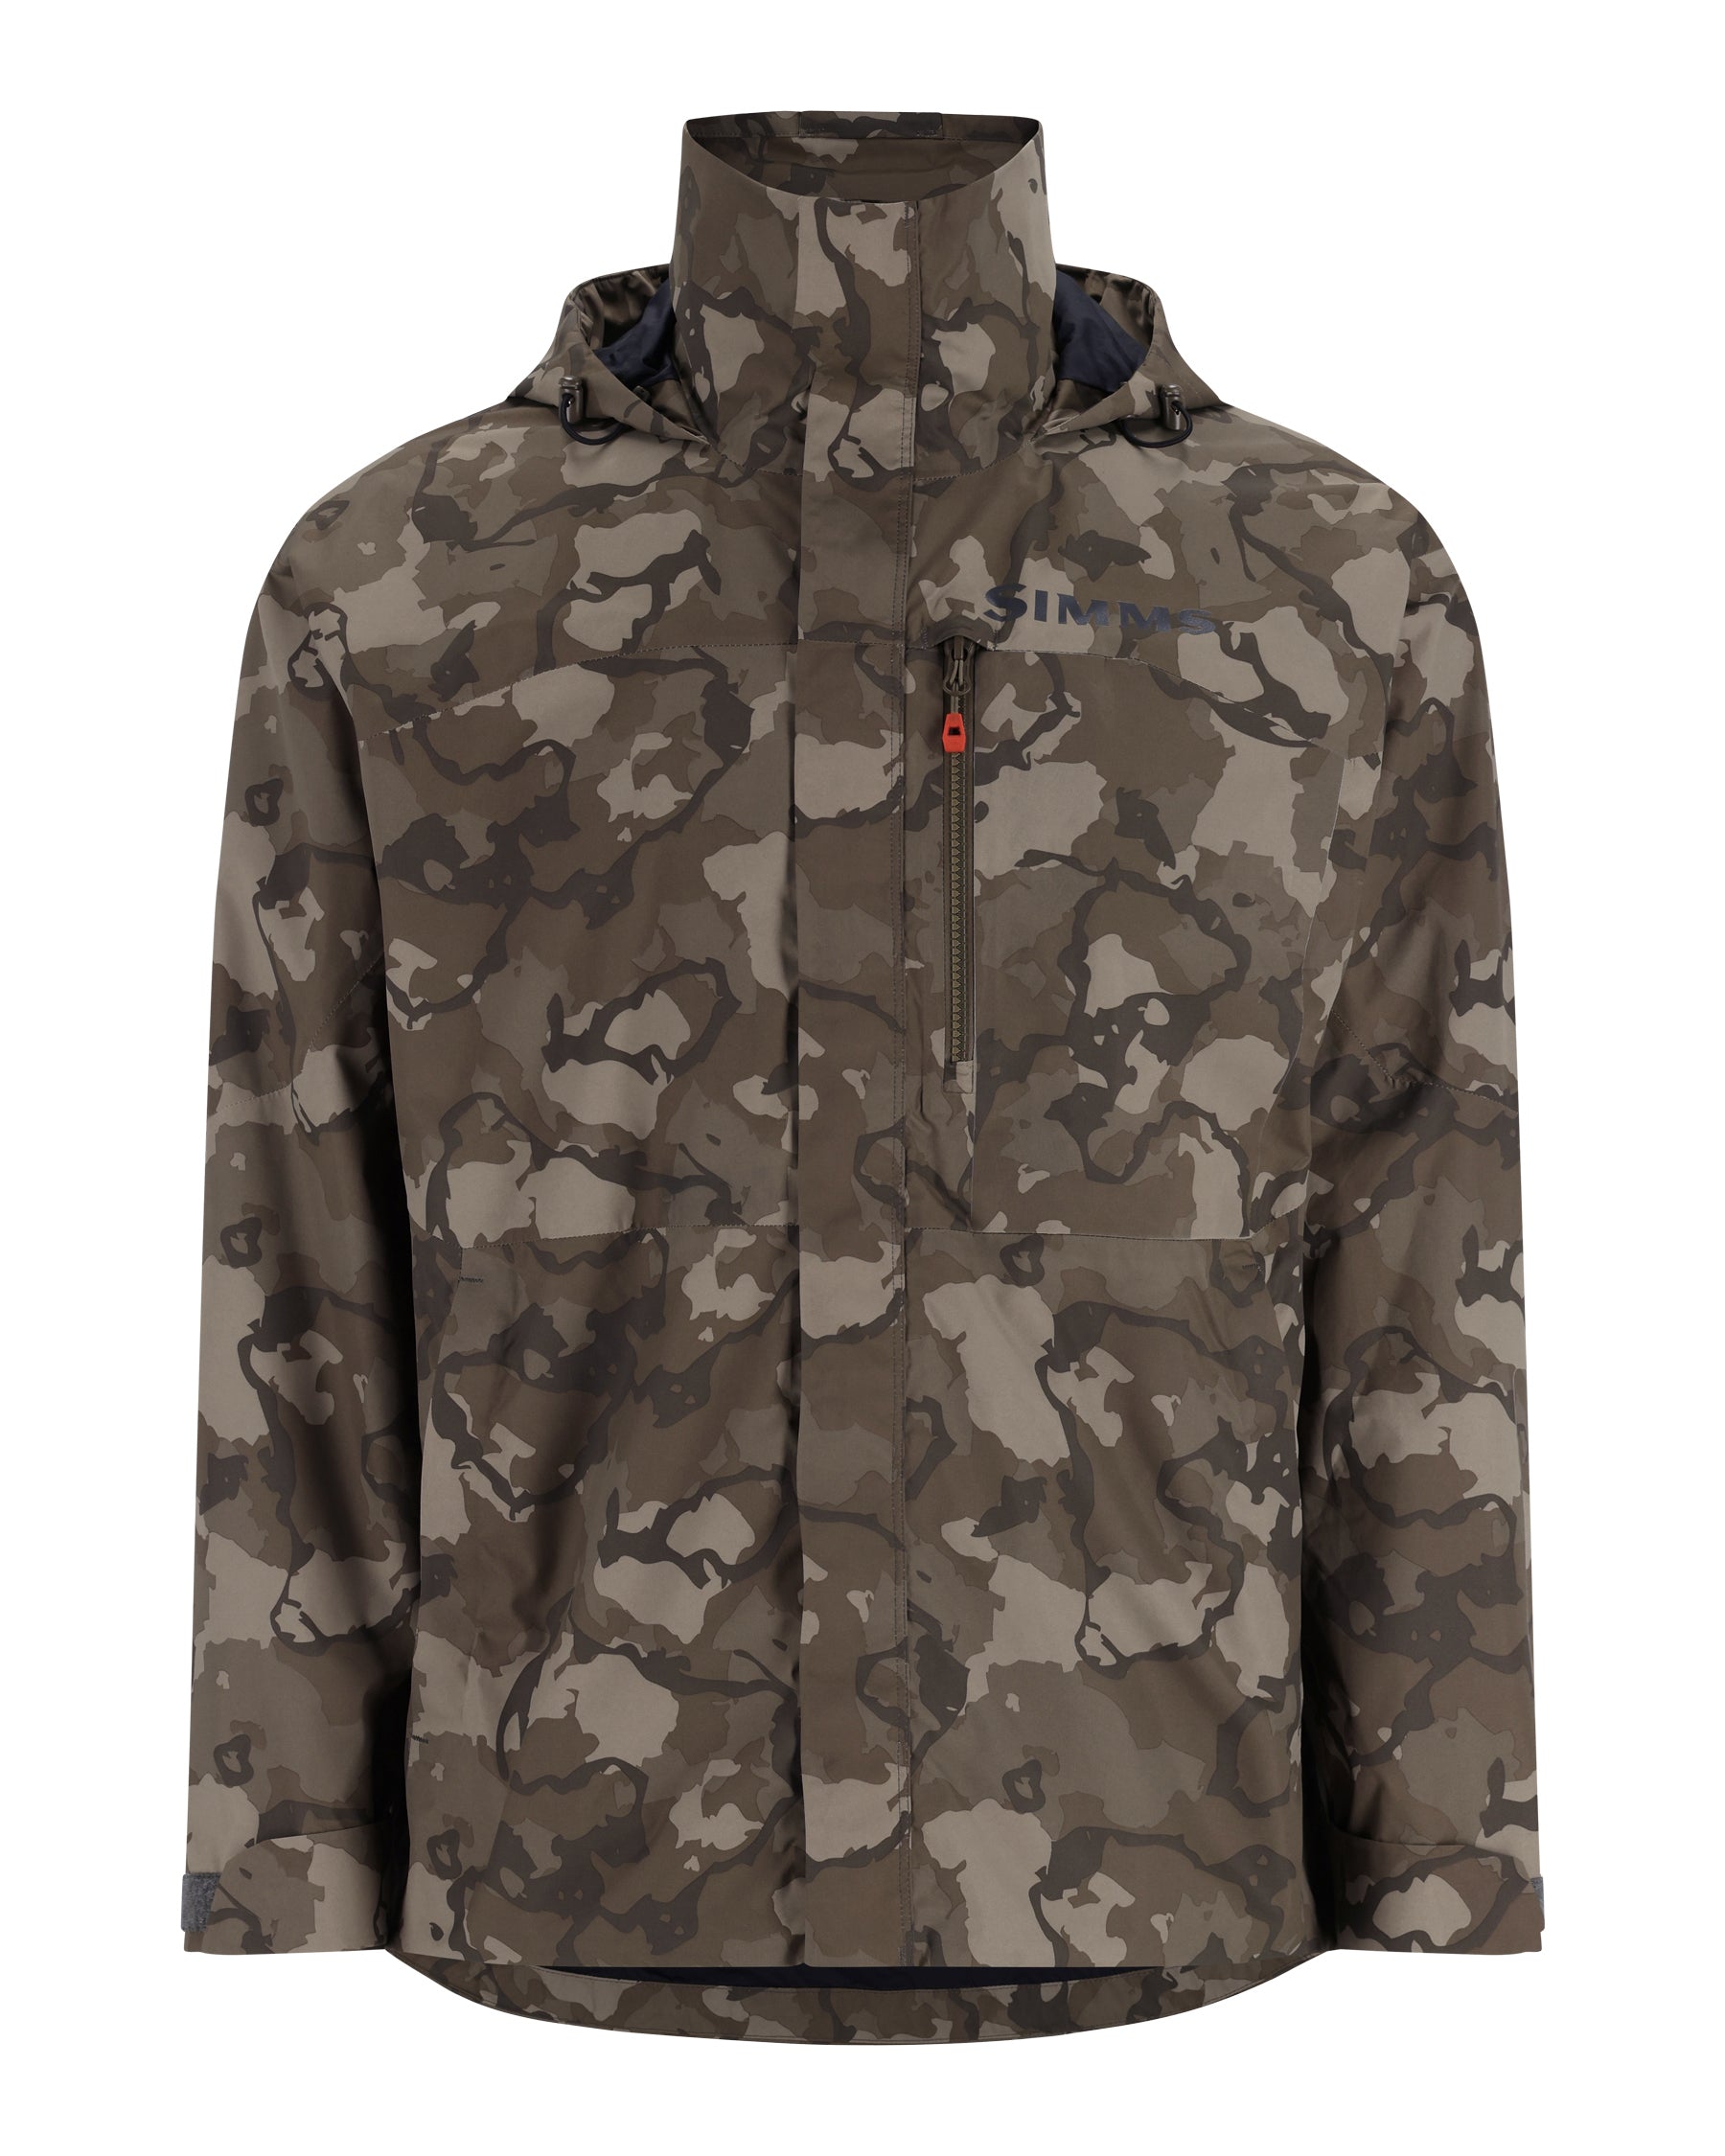 M's Simms Challenger Fishing Jacket | Simms Fishing Products